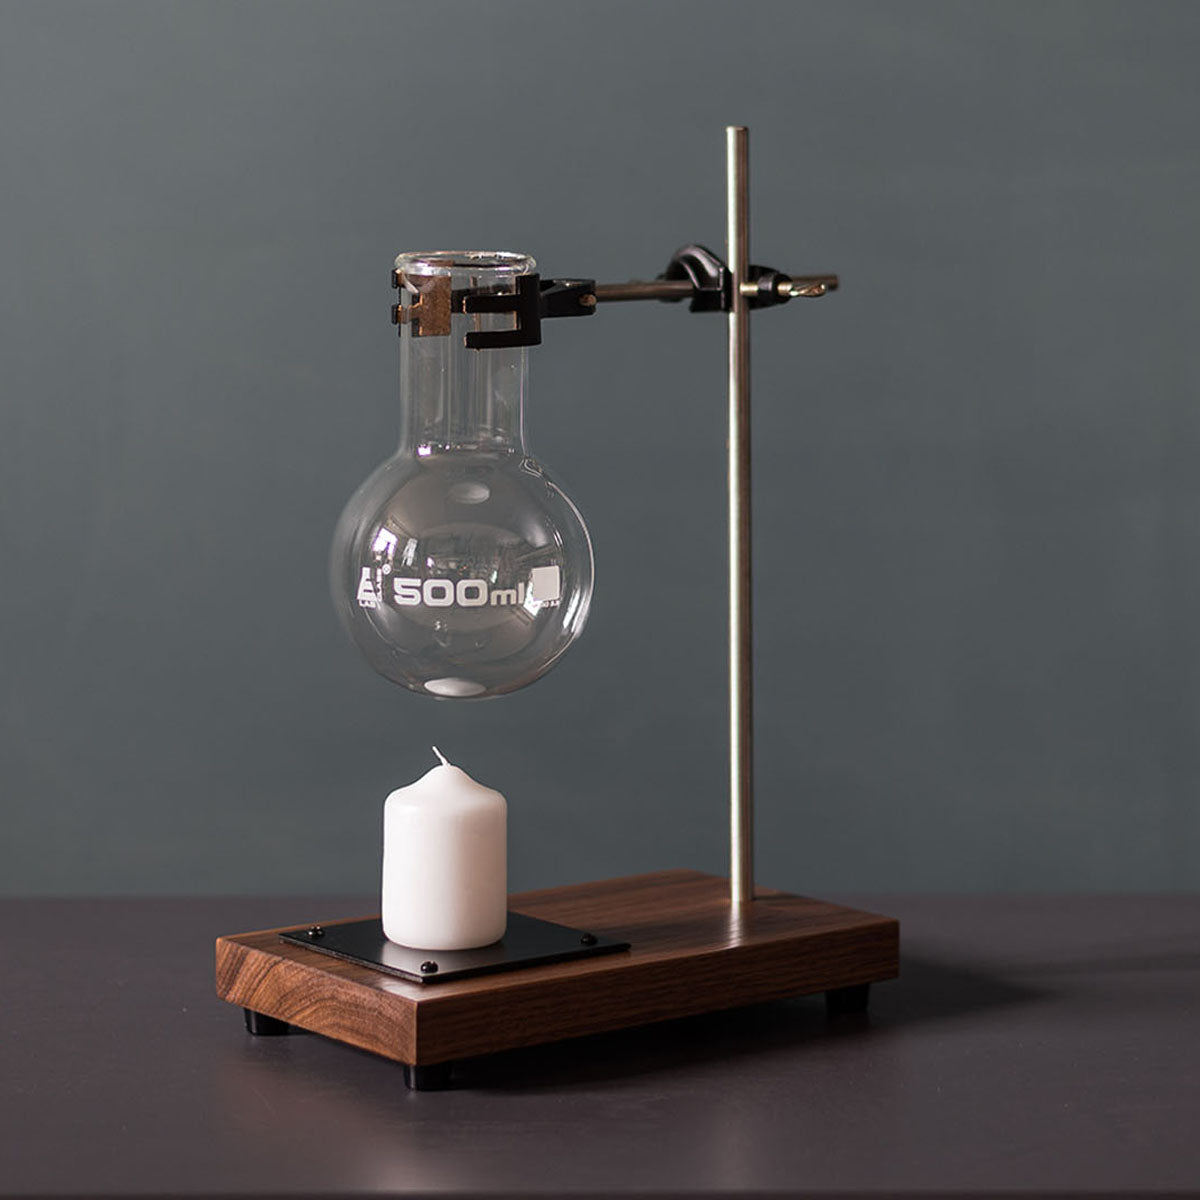 An image of the Essential Oil Burner, Walnut product available from Koda Studios